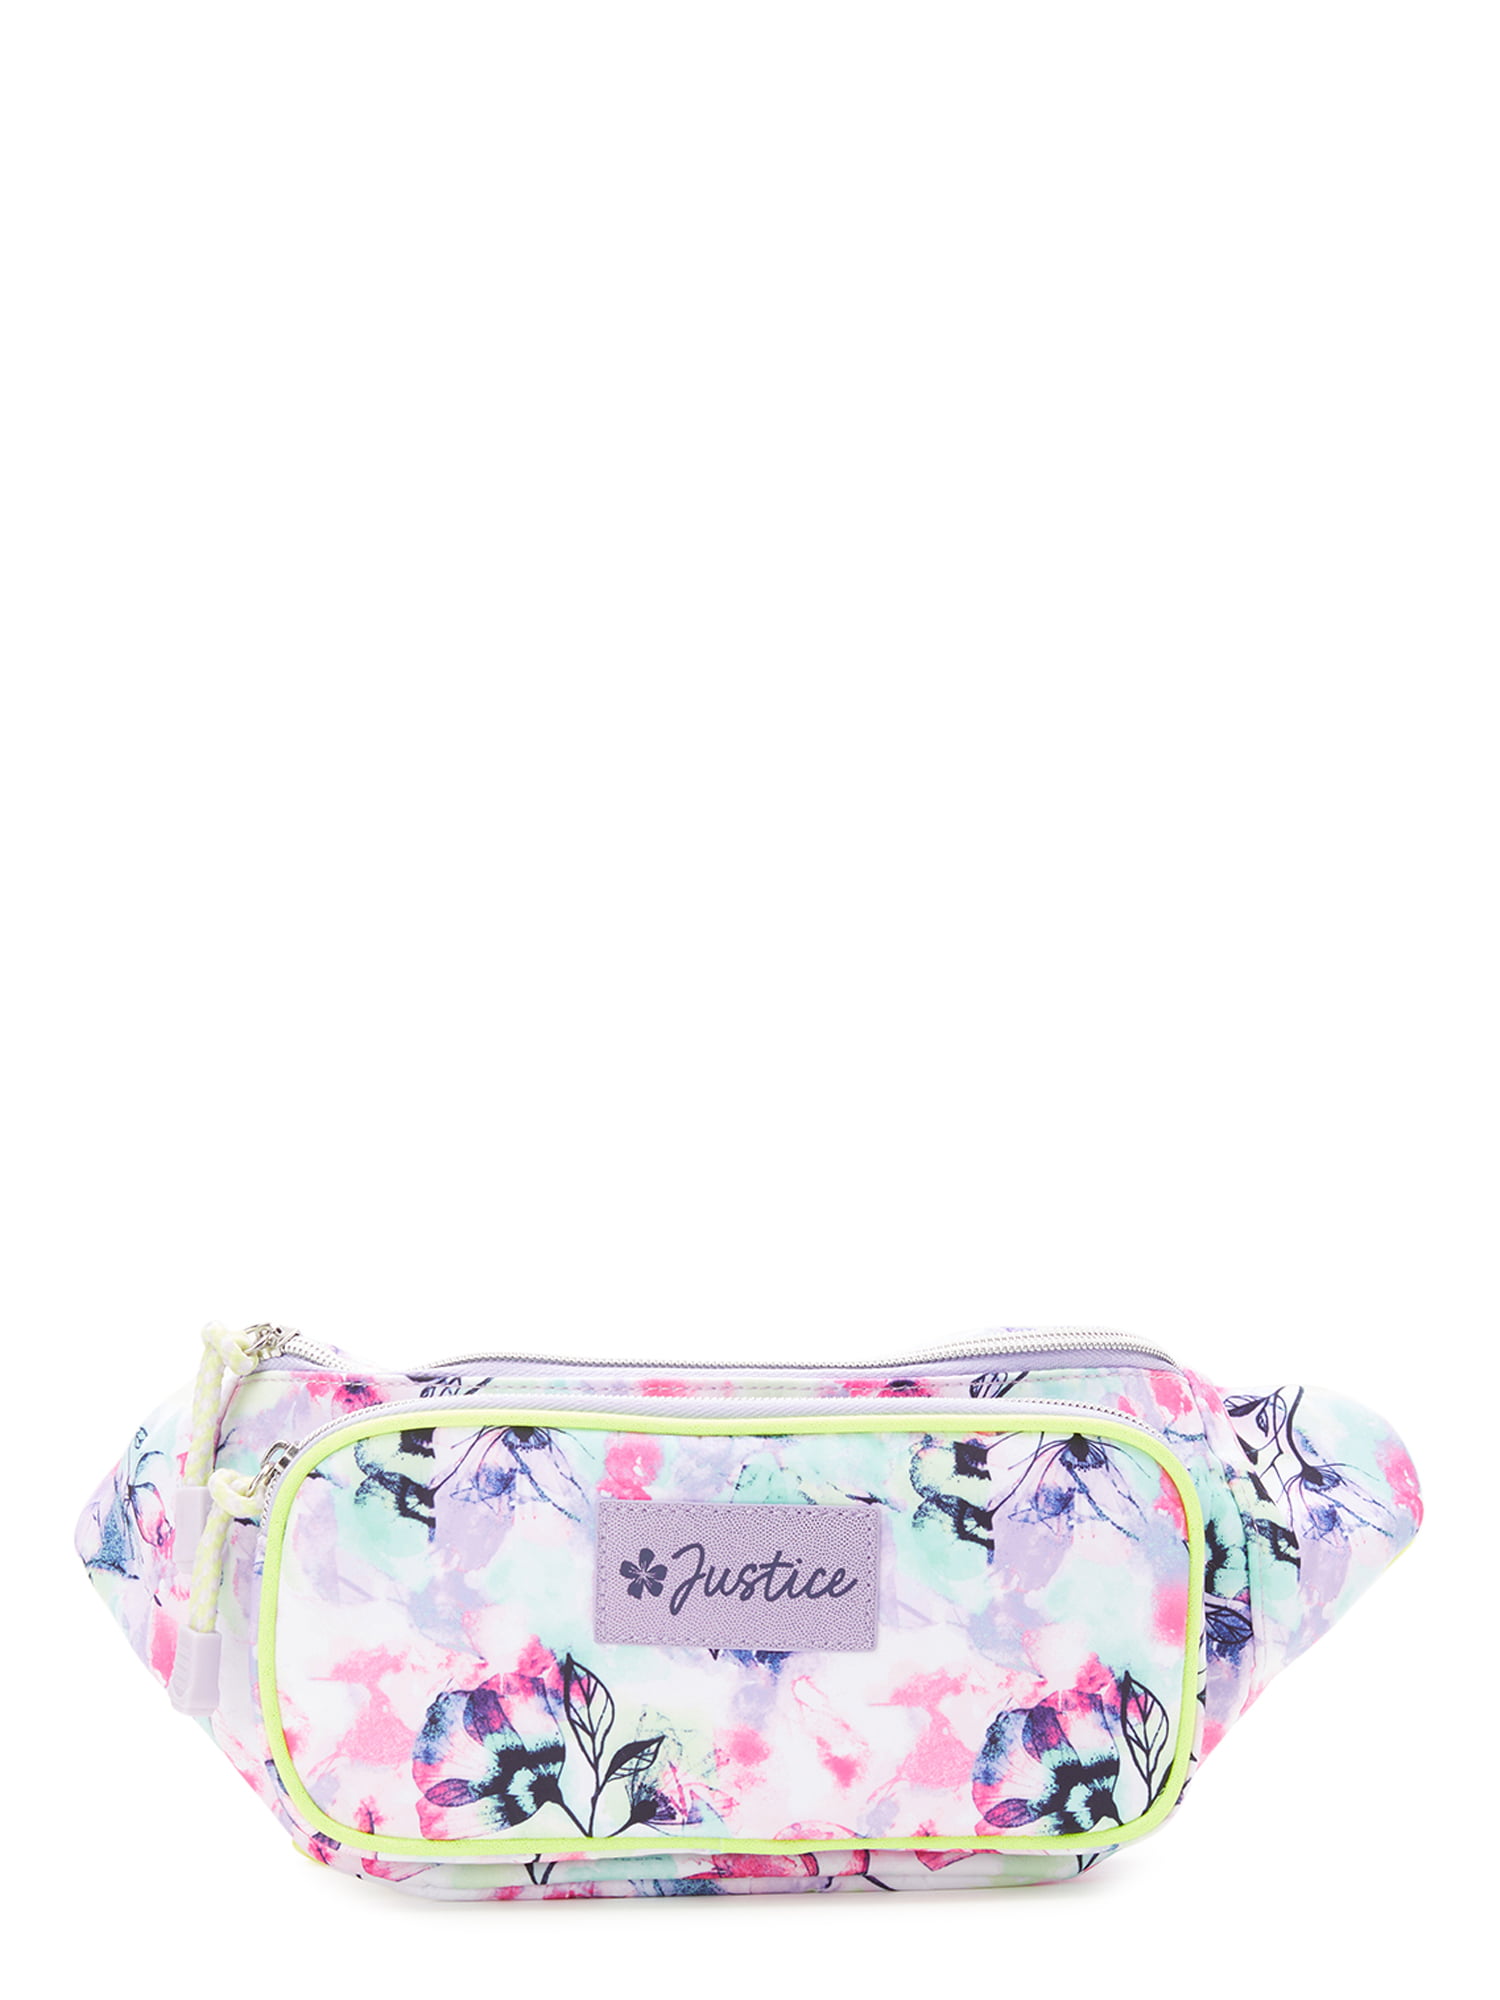 Justice Girls Black Patent Fanny Pack